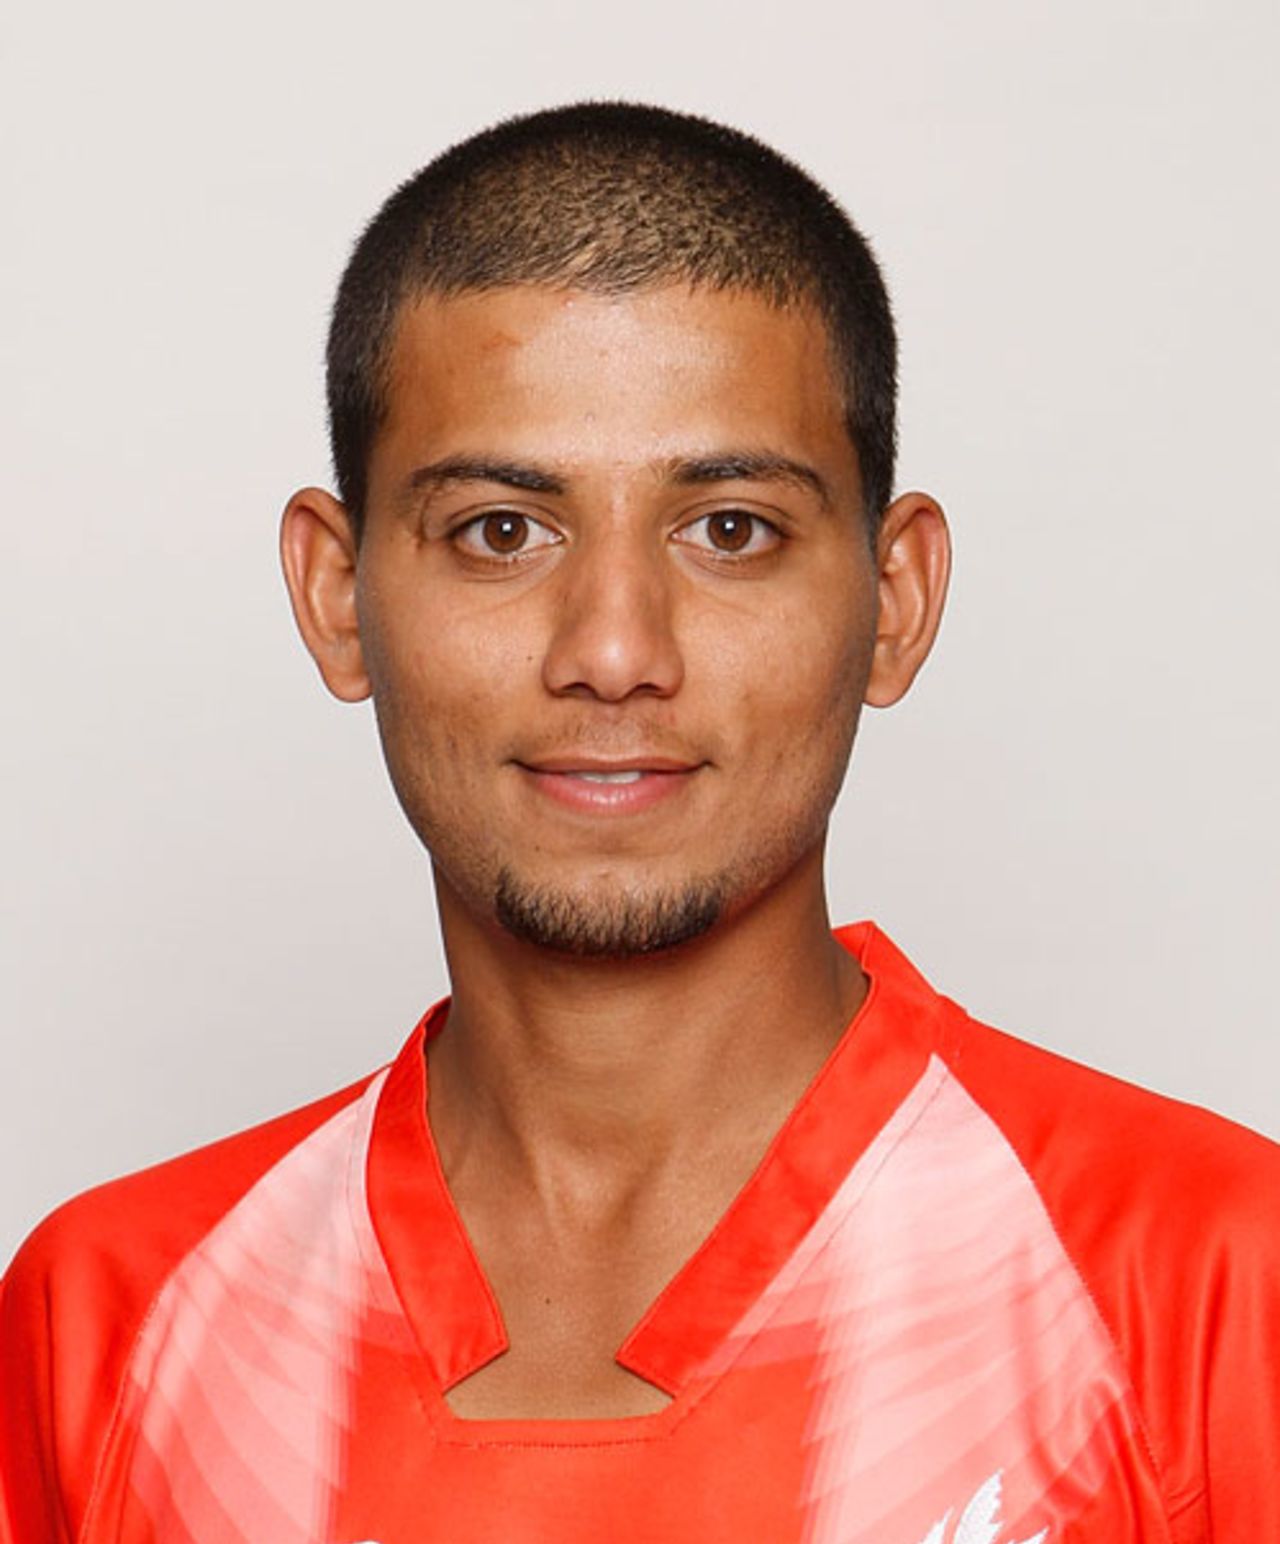 Manny Aulakh at the Under-19 World Cup, 13 January, 2010